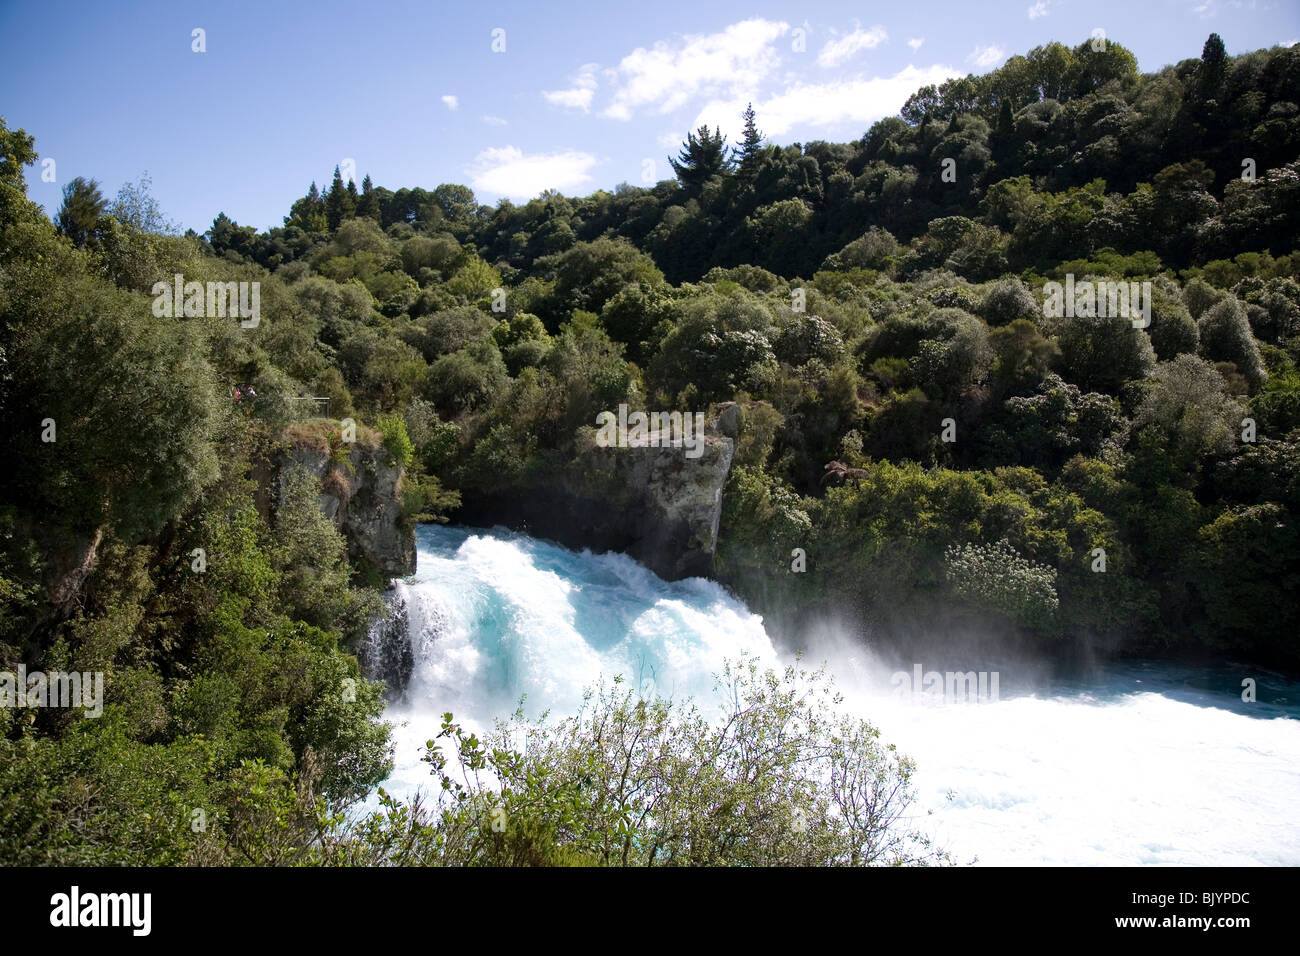 The rushing Waikato River forms the famous Huka Falls just outside the town of Taupo New Zealand Stock Photo